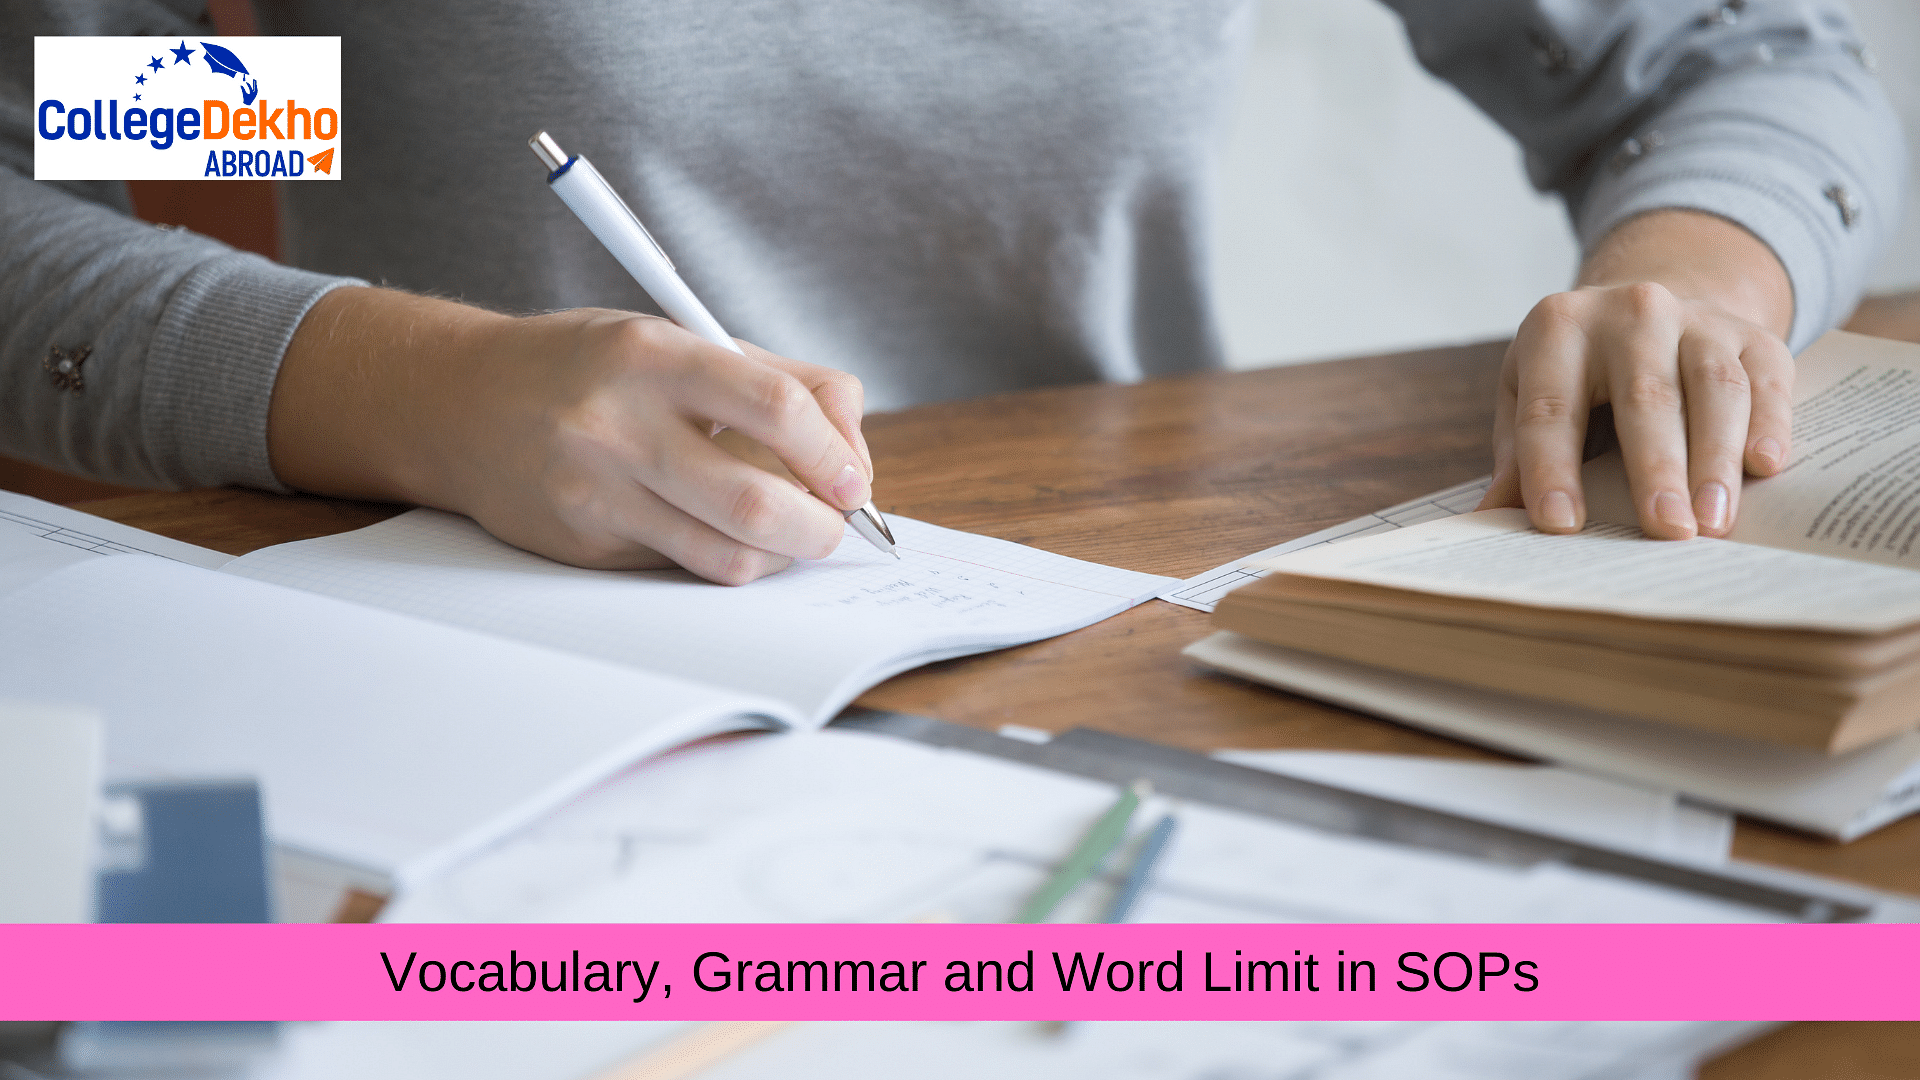 Vocabulary, Grammar, and Word Limit in SOPs